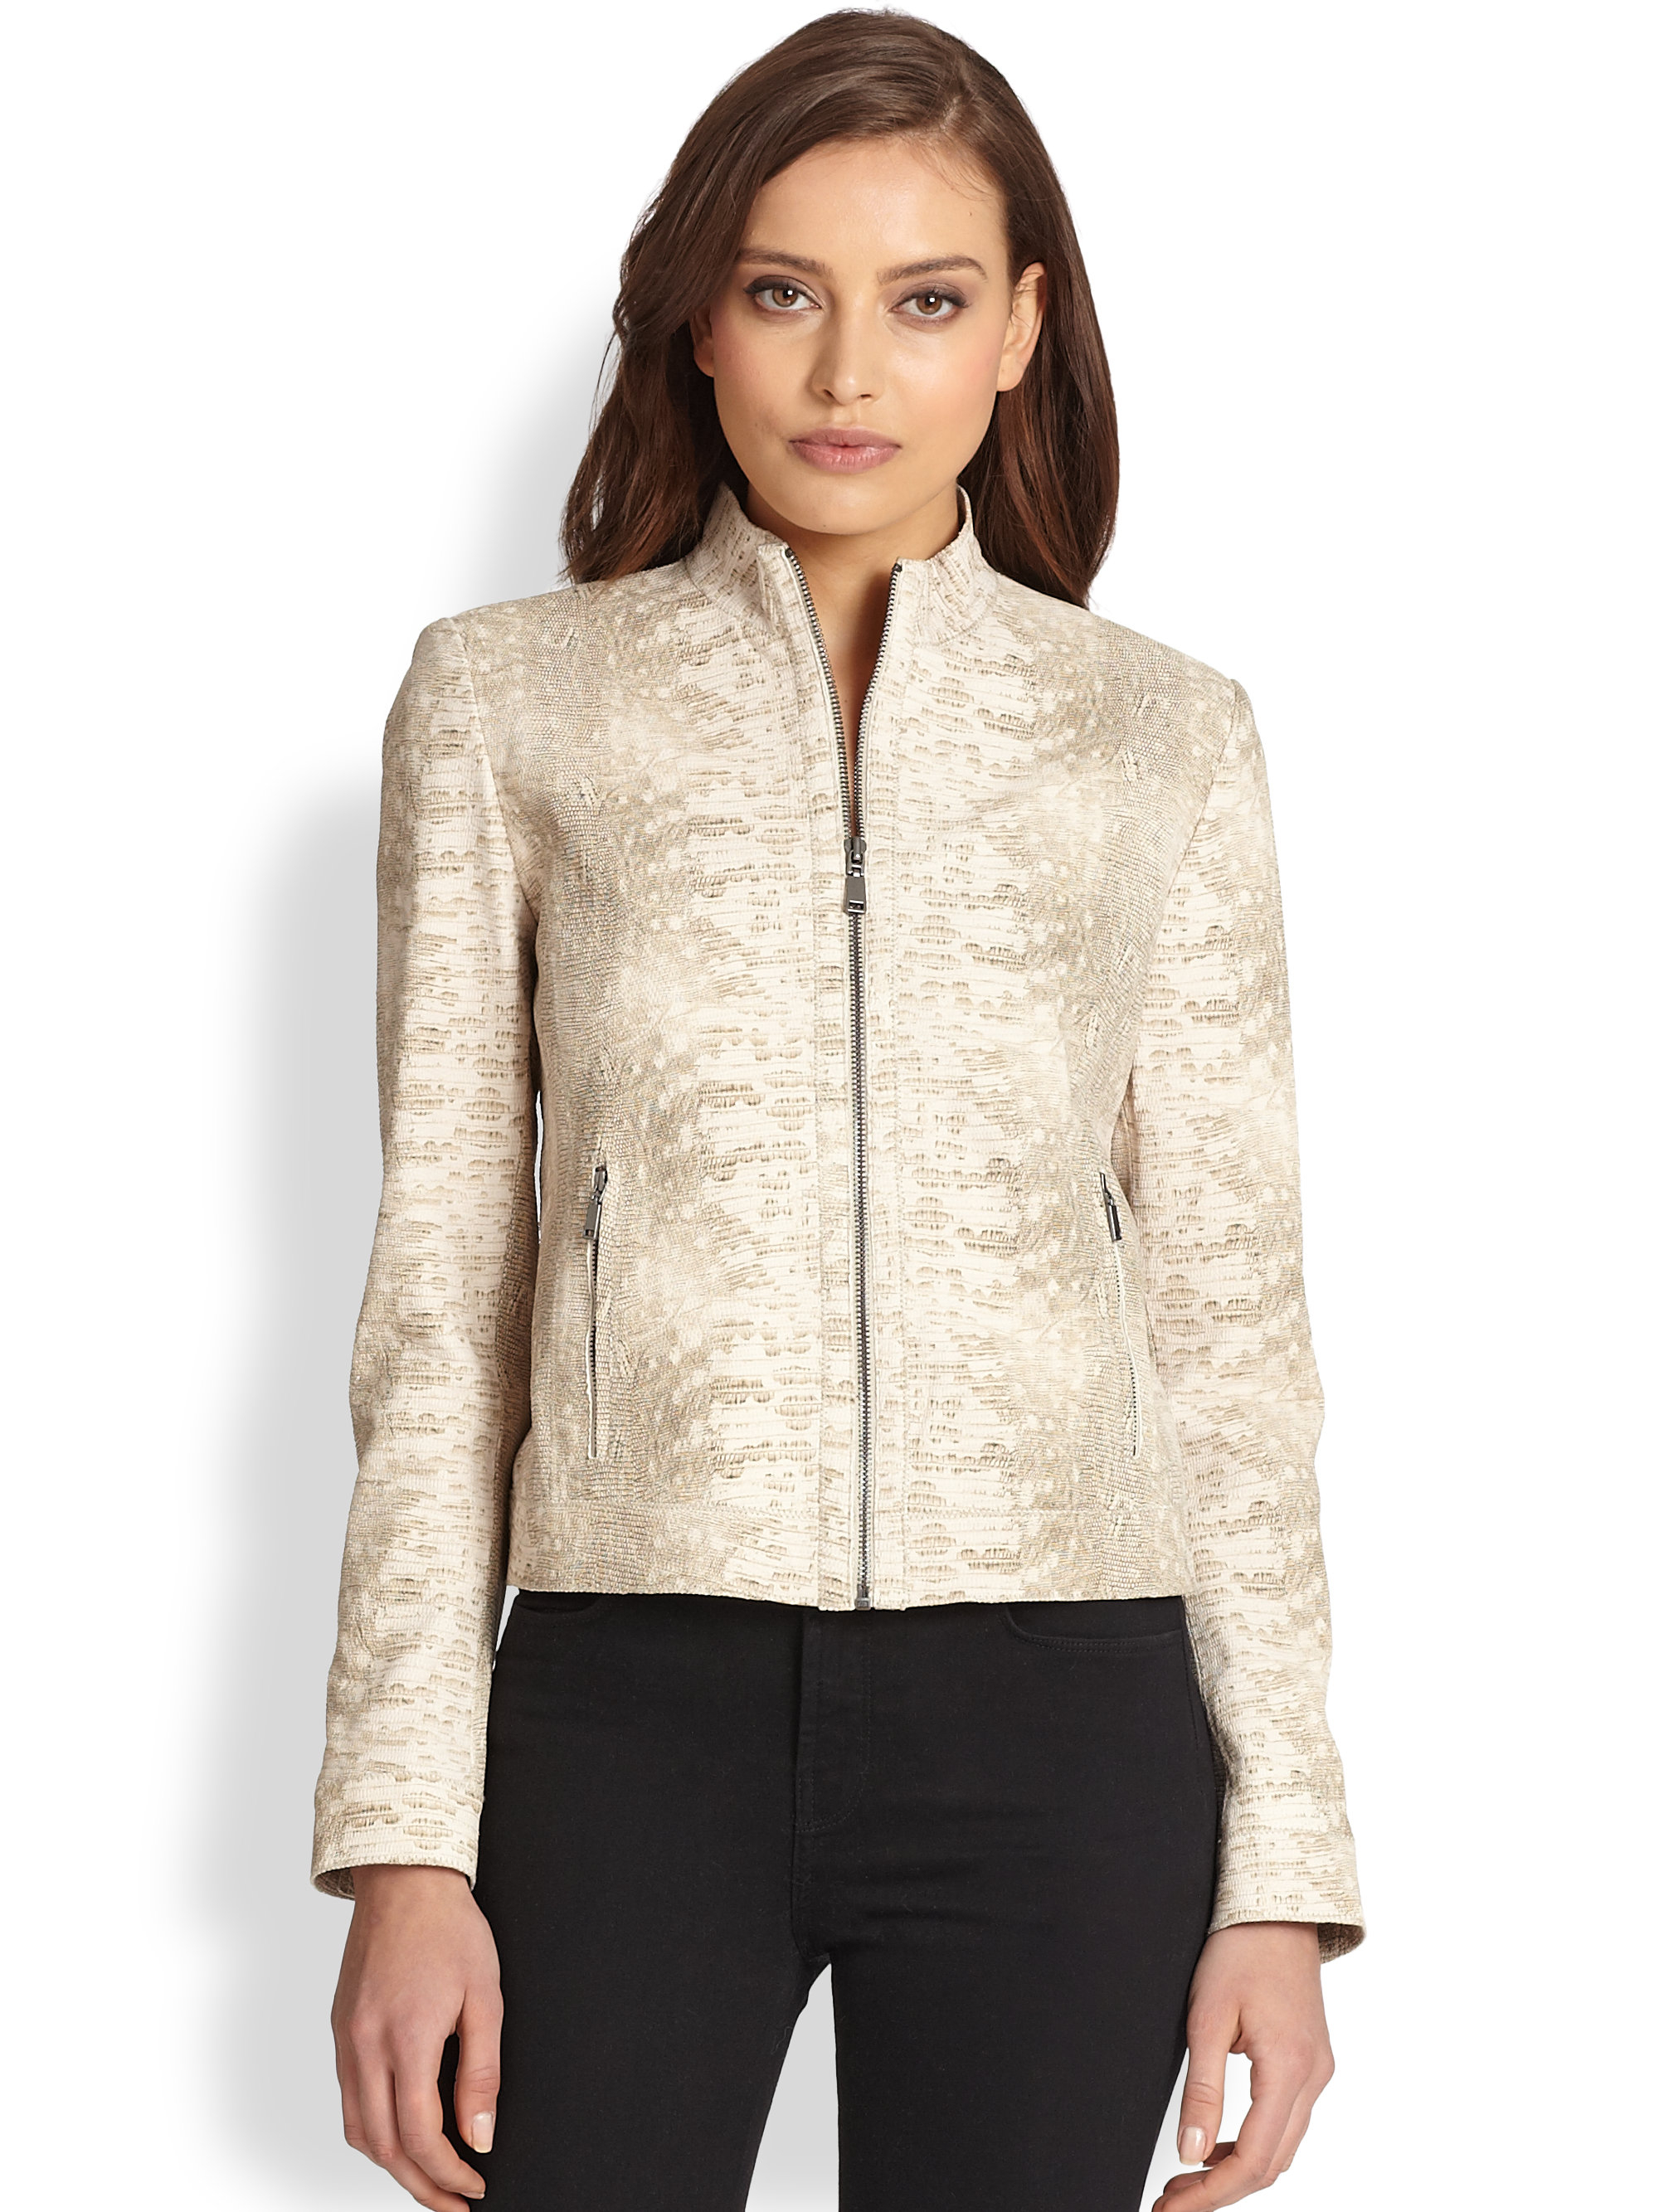 Lyst - Elie Tahari Leather Cleary Jacket in Natural